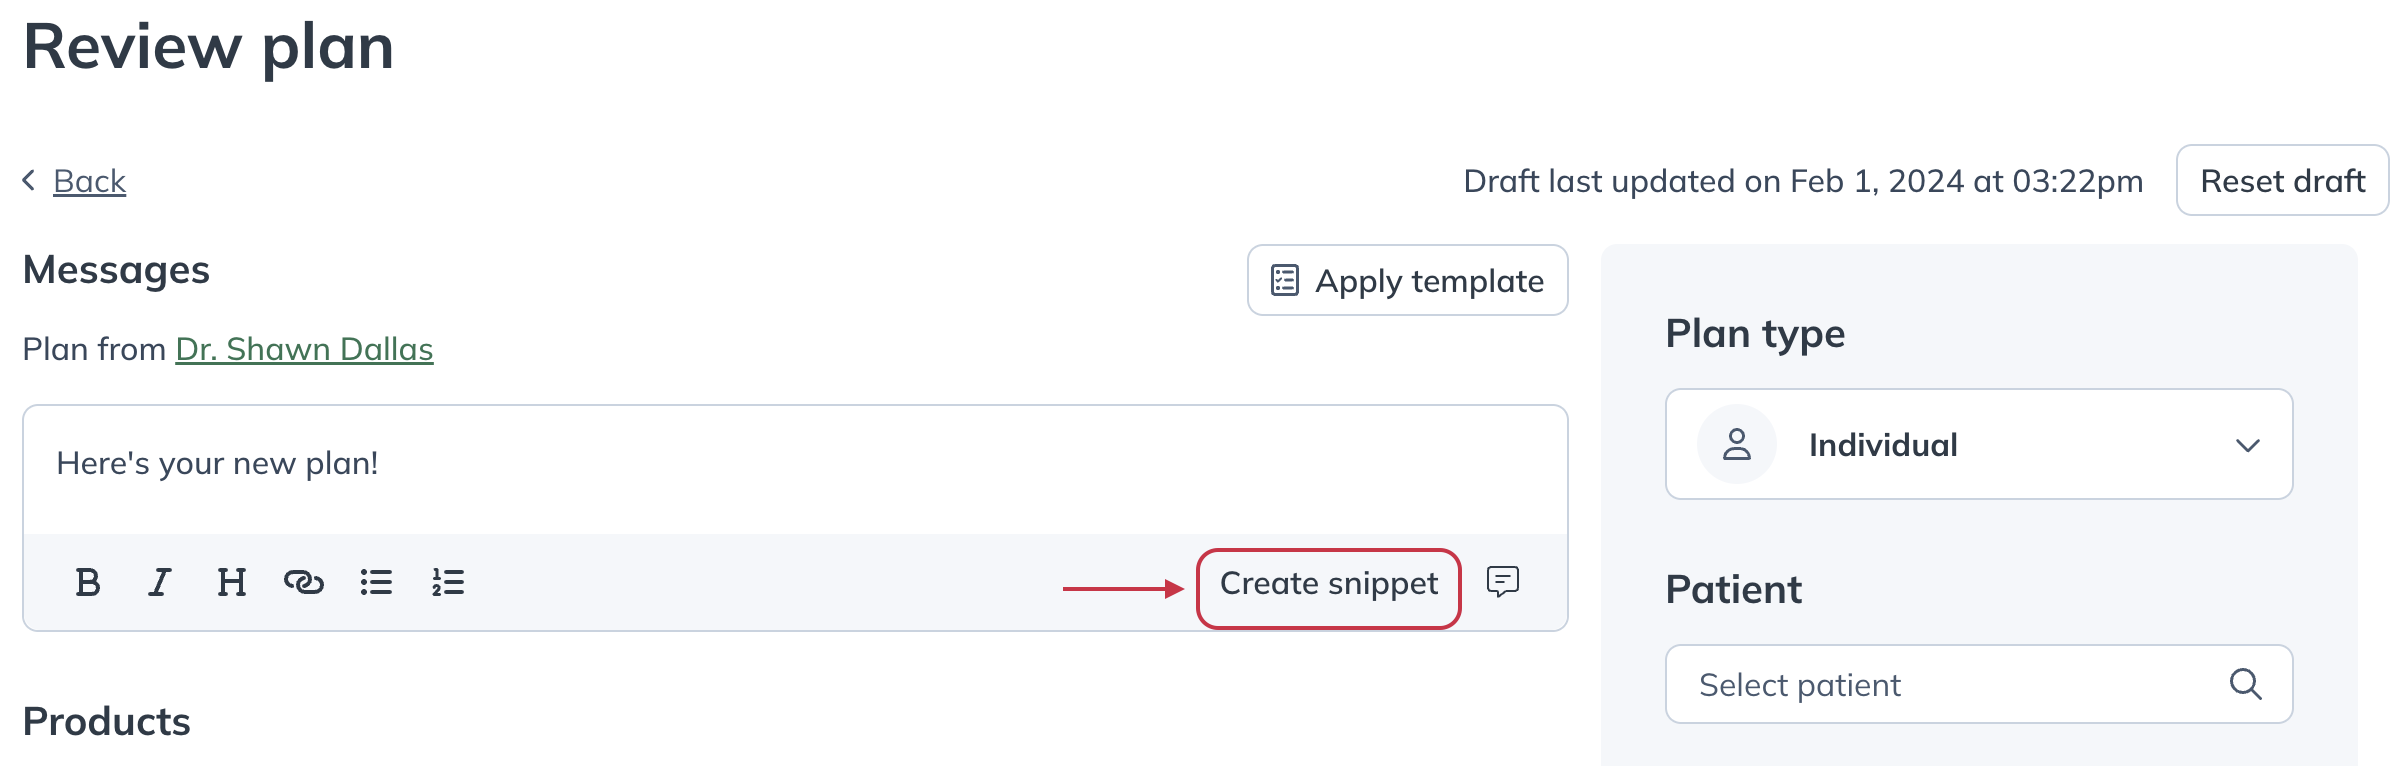 Create snippet